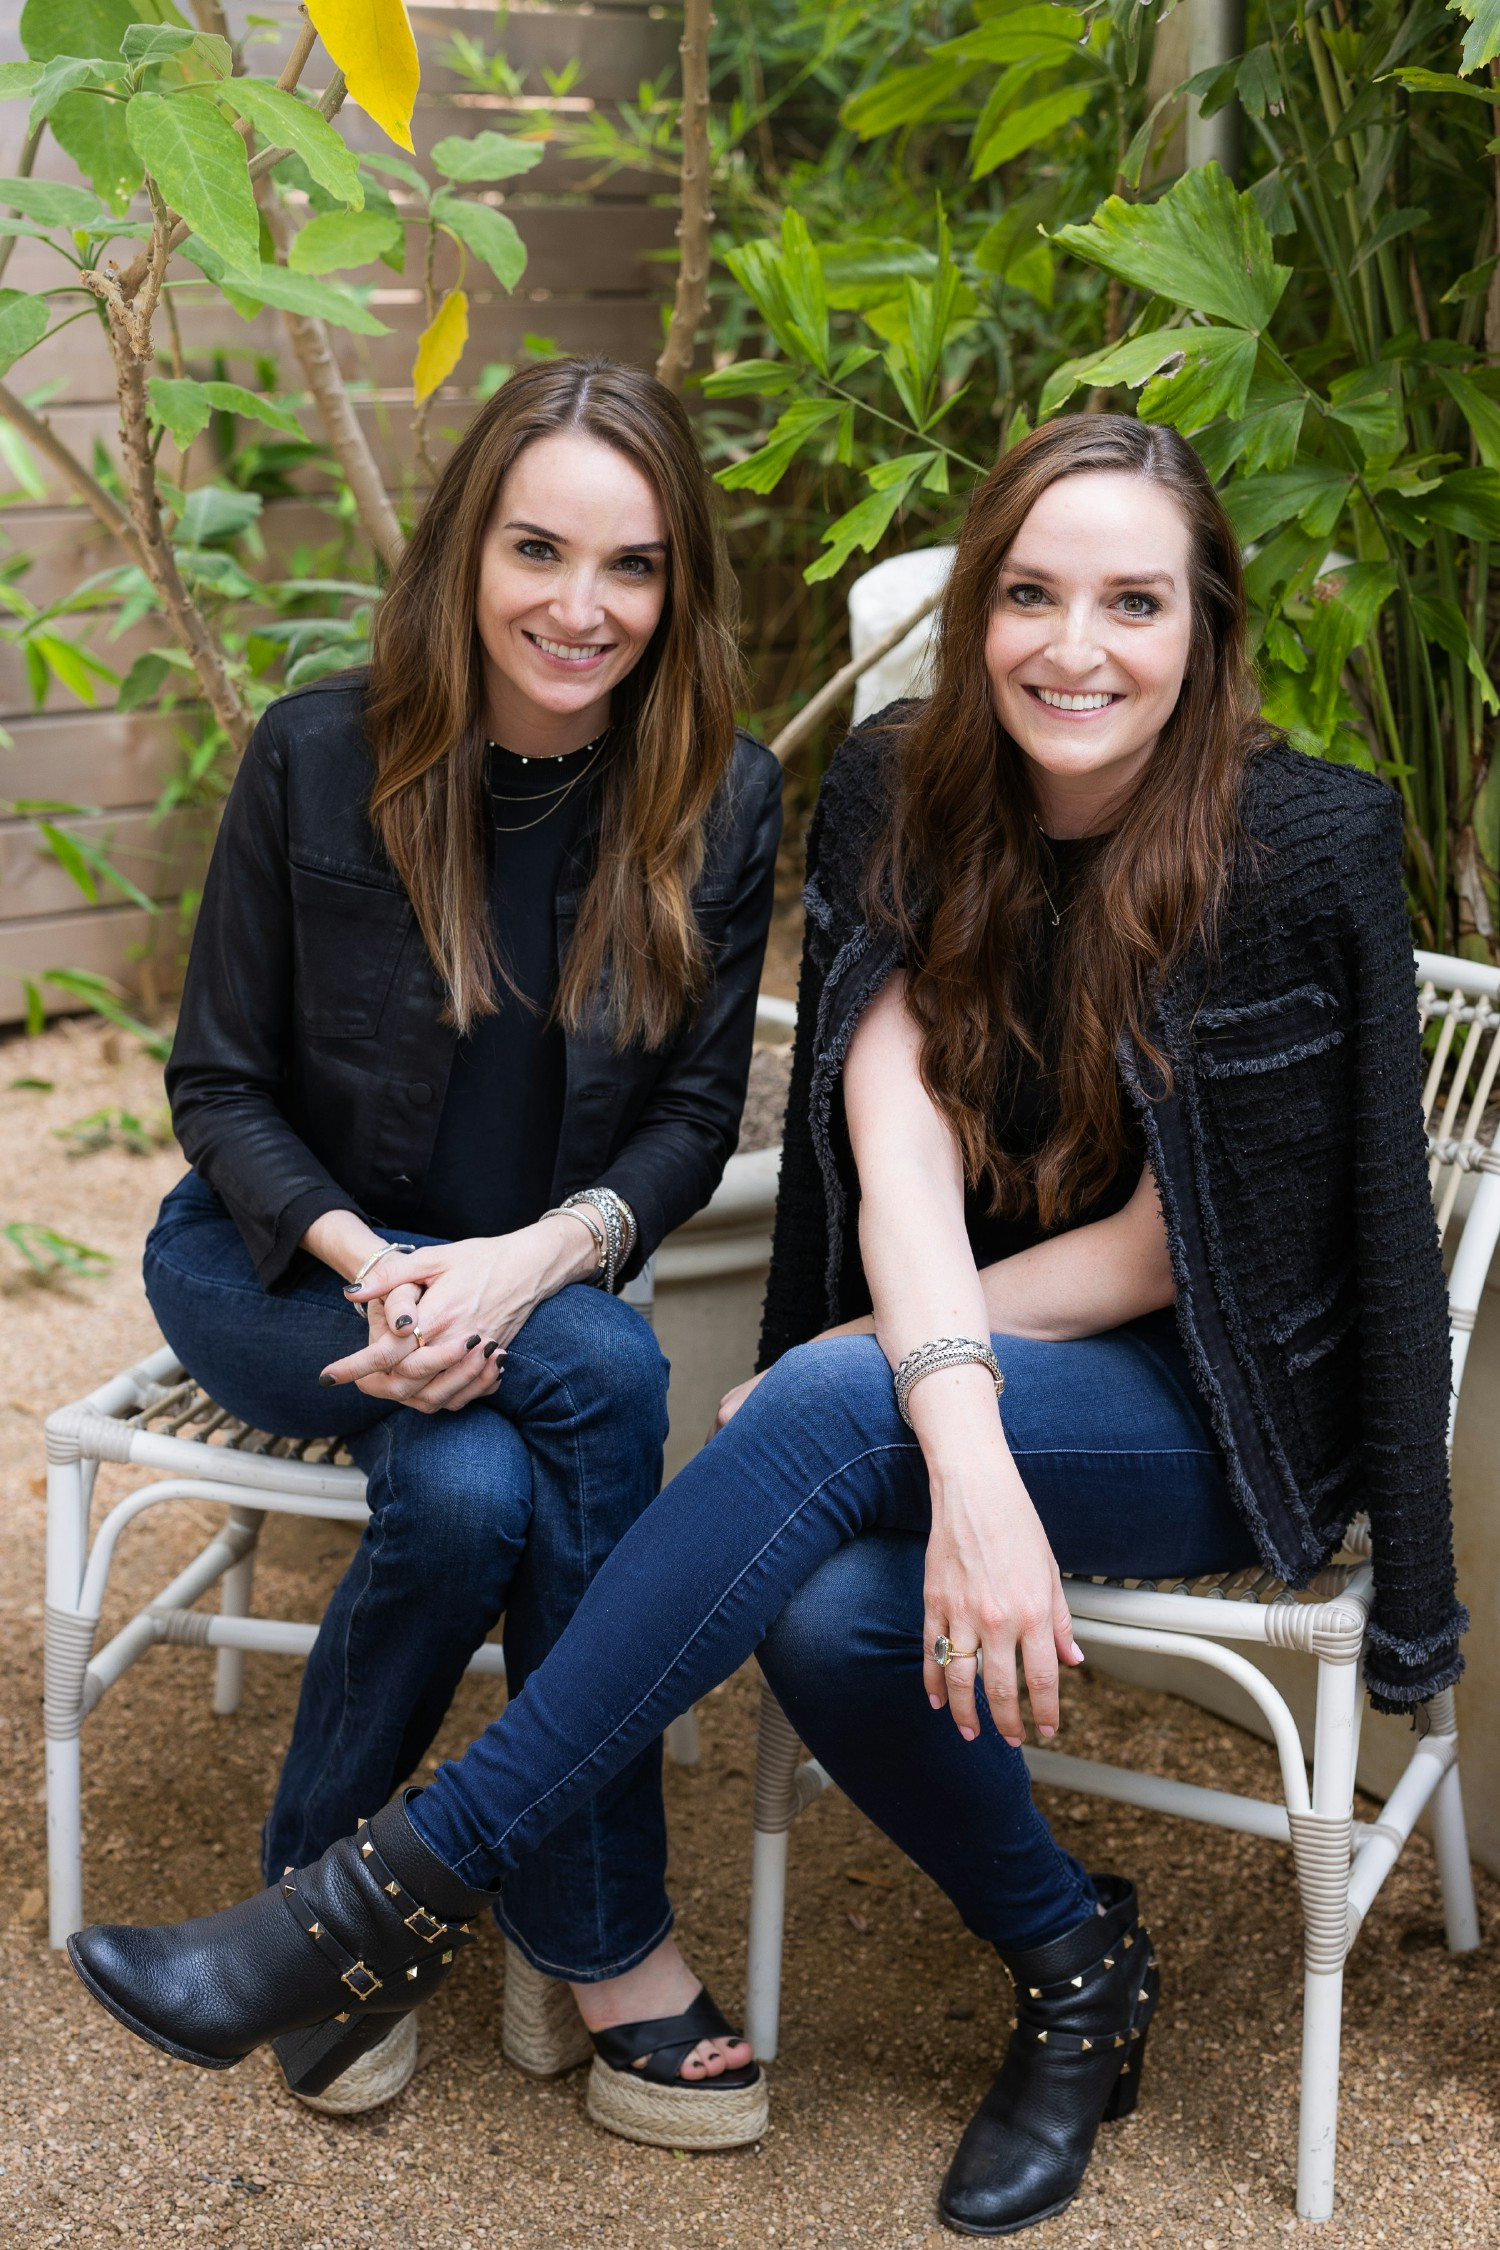 Founders and Co-Presidents Susan Miller and Jessica Essl.